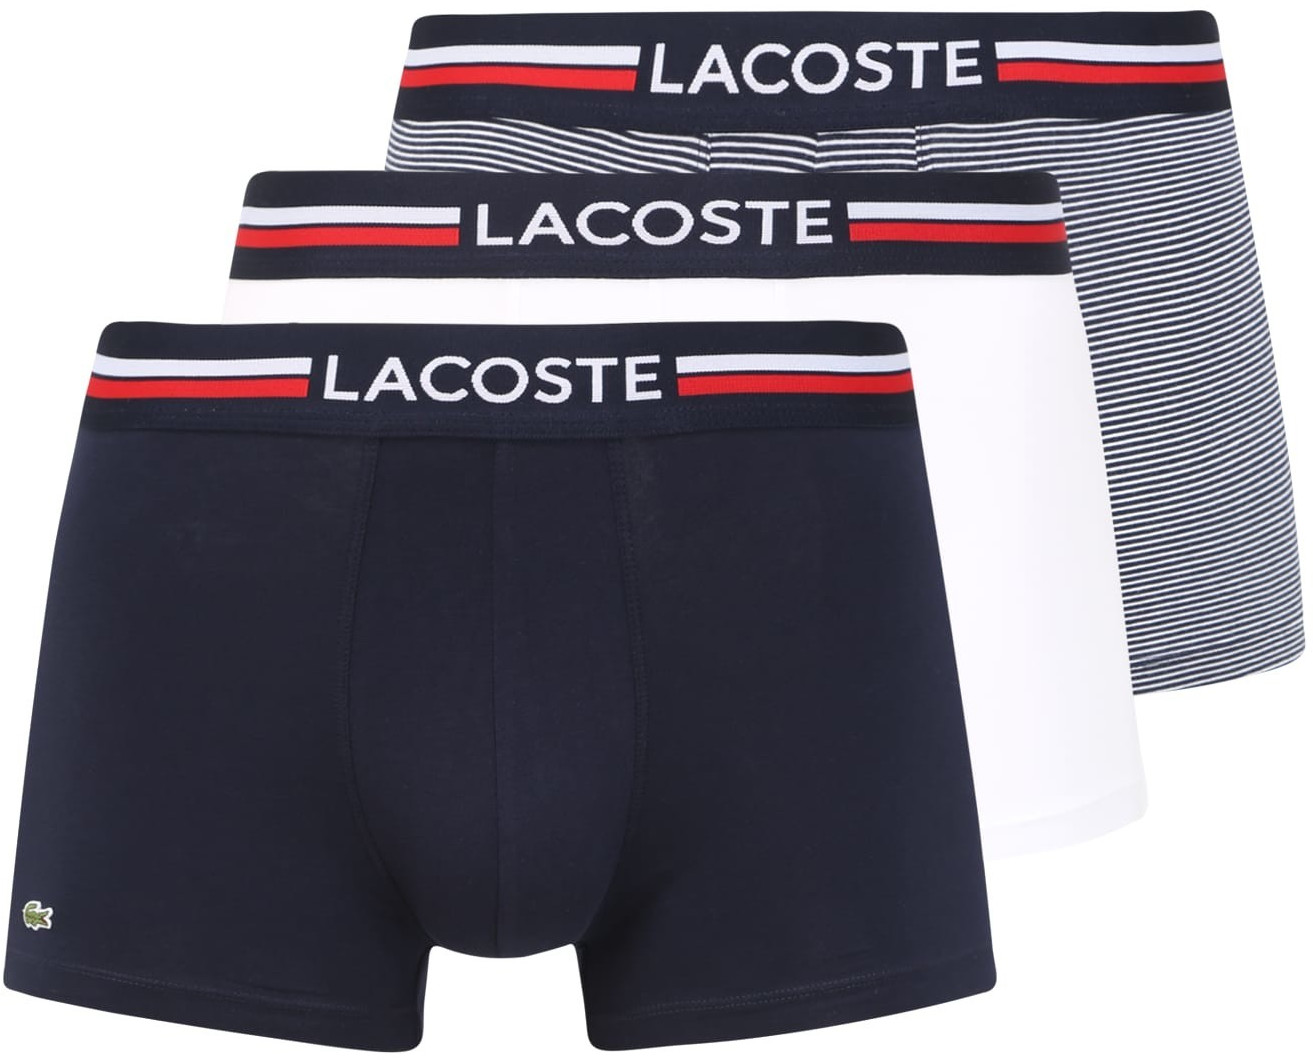 Buy Lacoste 3- Pack Trunks (5H3413) from £24.99 (Today) – Best Deals on